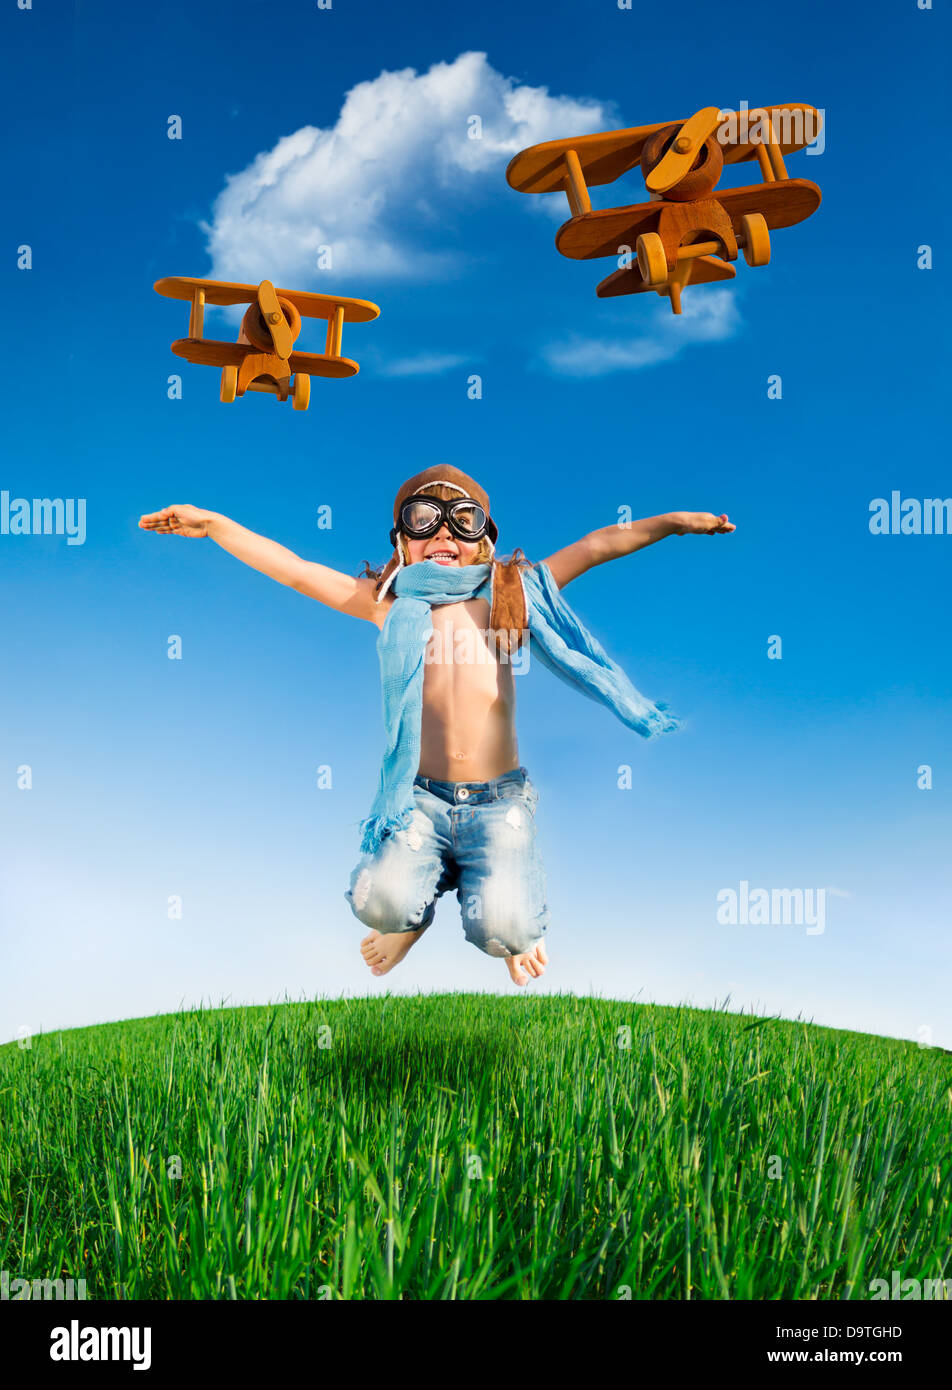 Happy kid dressed as a pilot jumping in green field against blue sky. Summer vacation concept Stock Photo